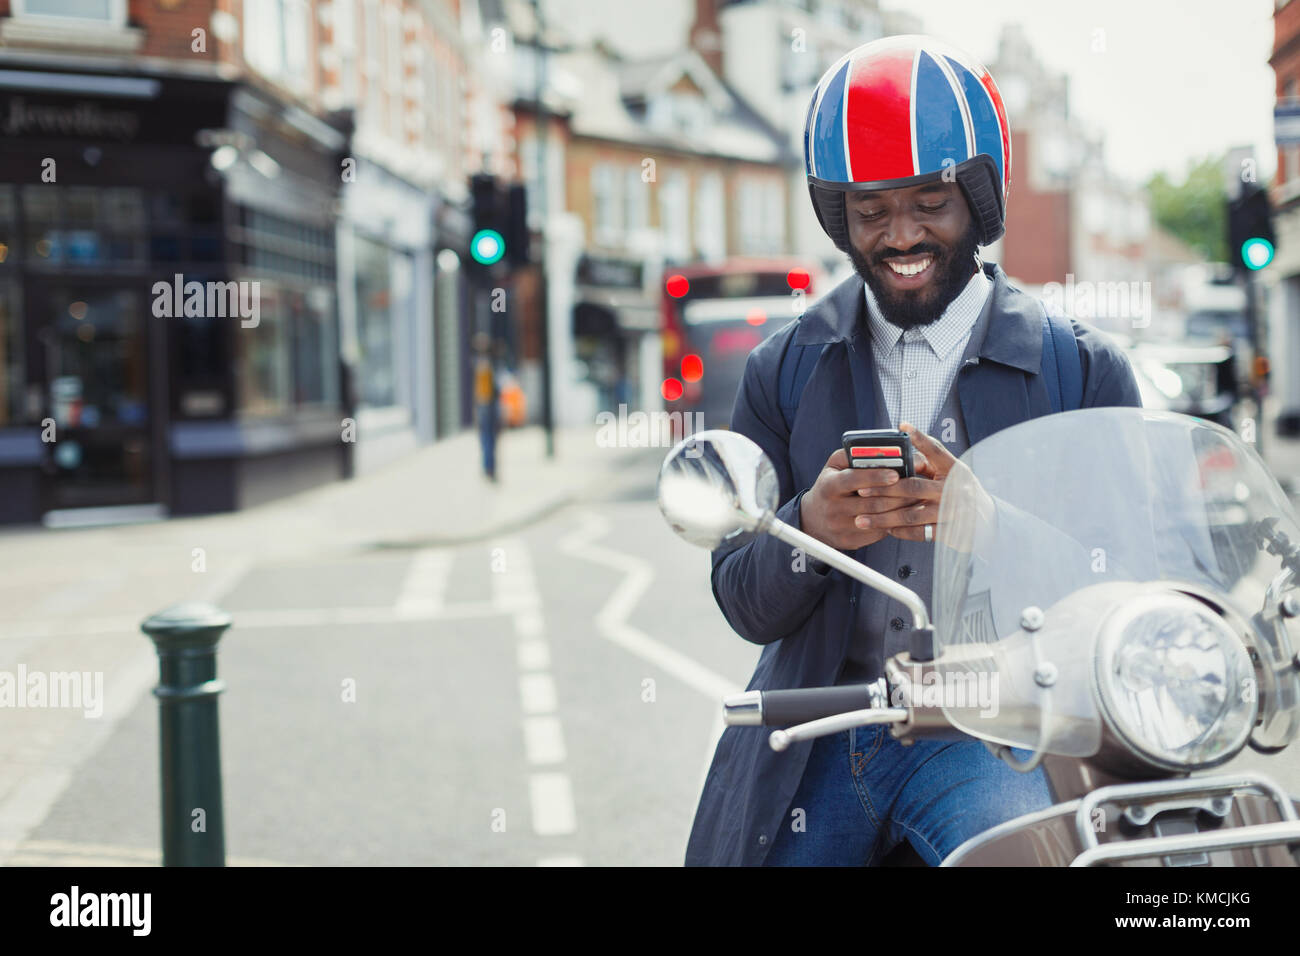 Smiling young businessman in helmet on motor scooter texting with cell phone on urban street Stock Photo